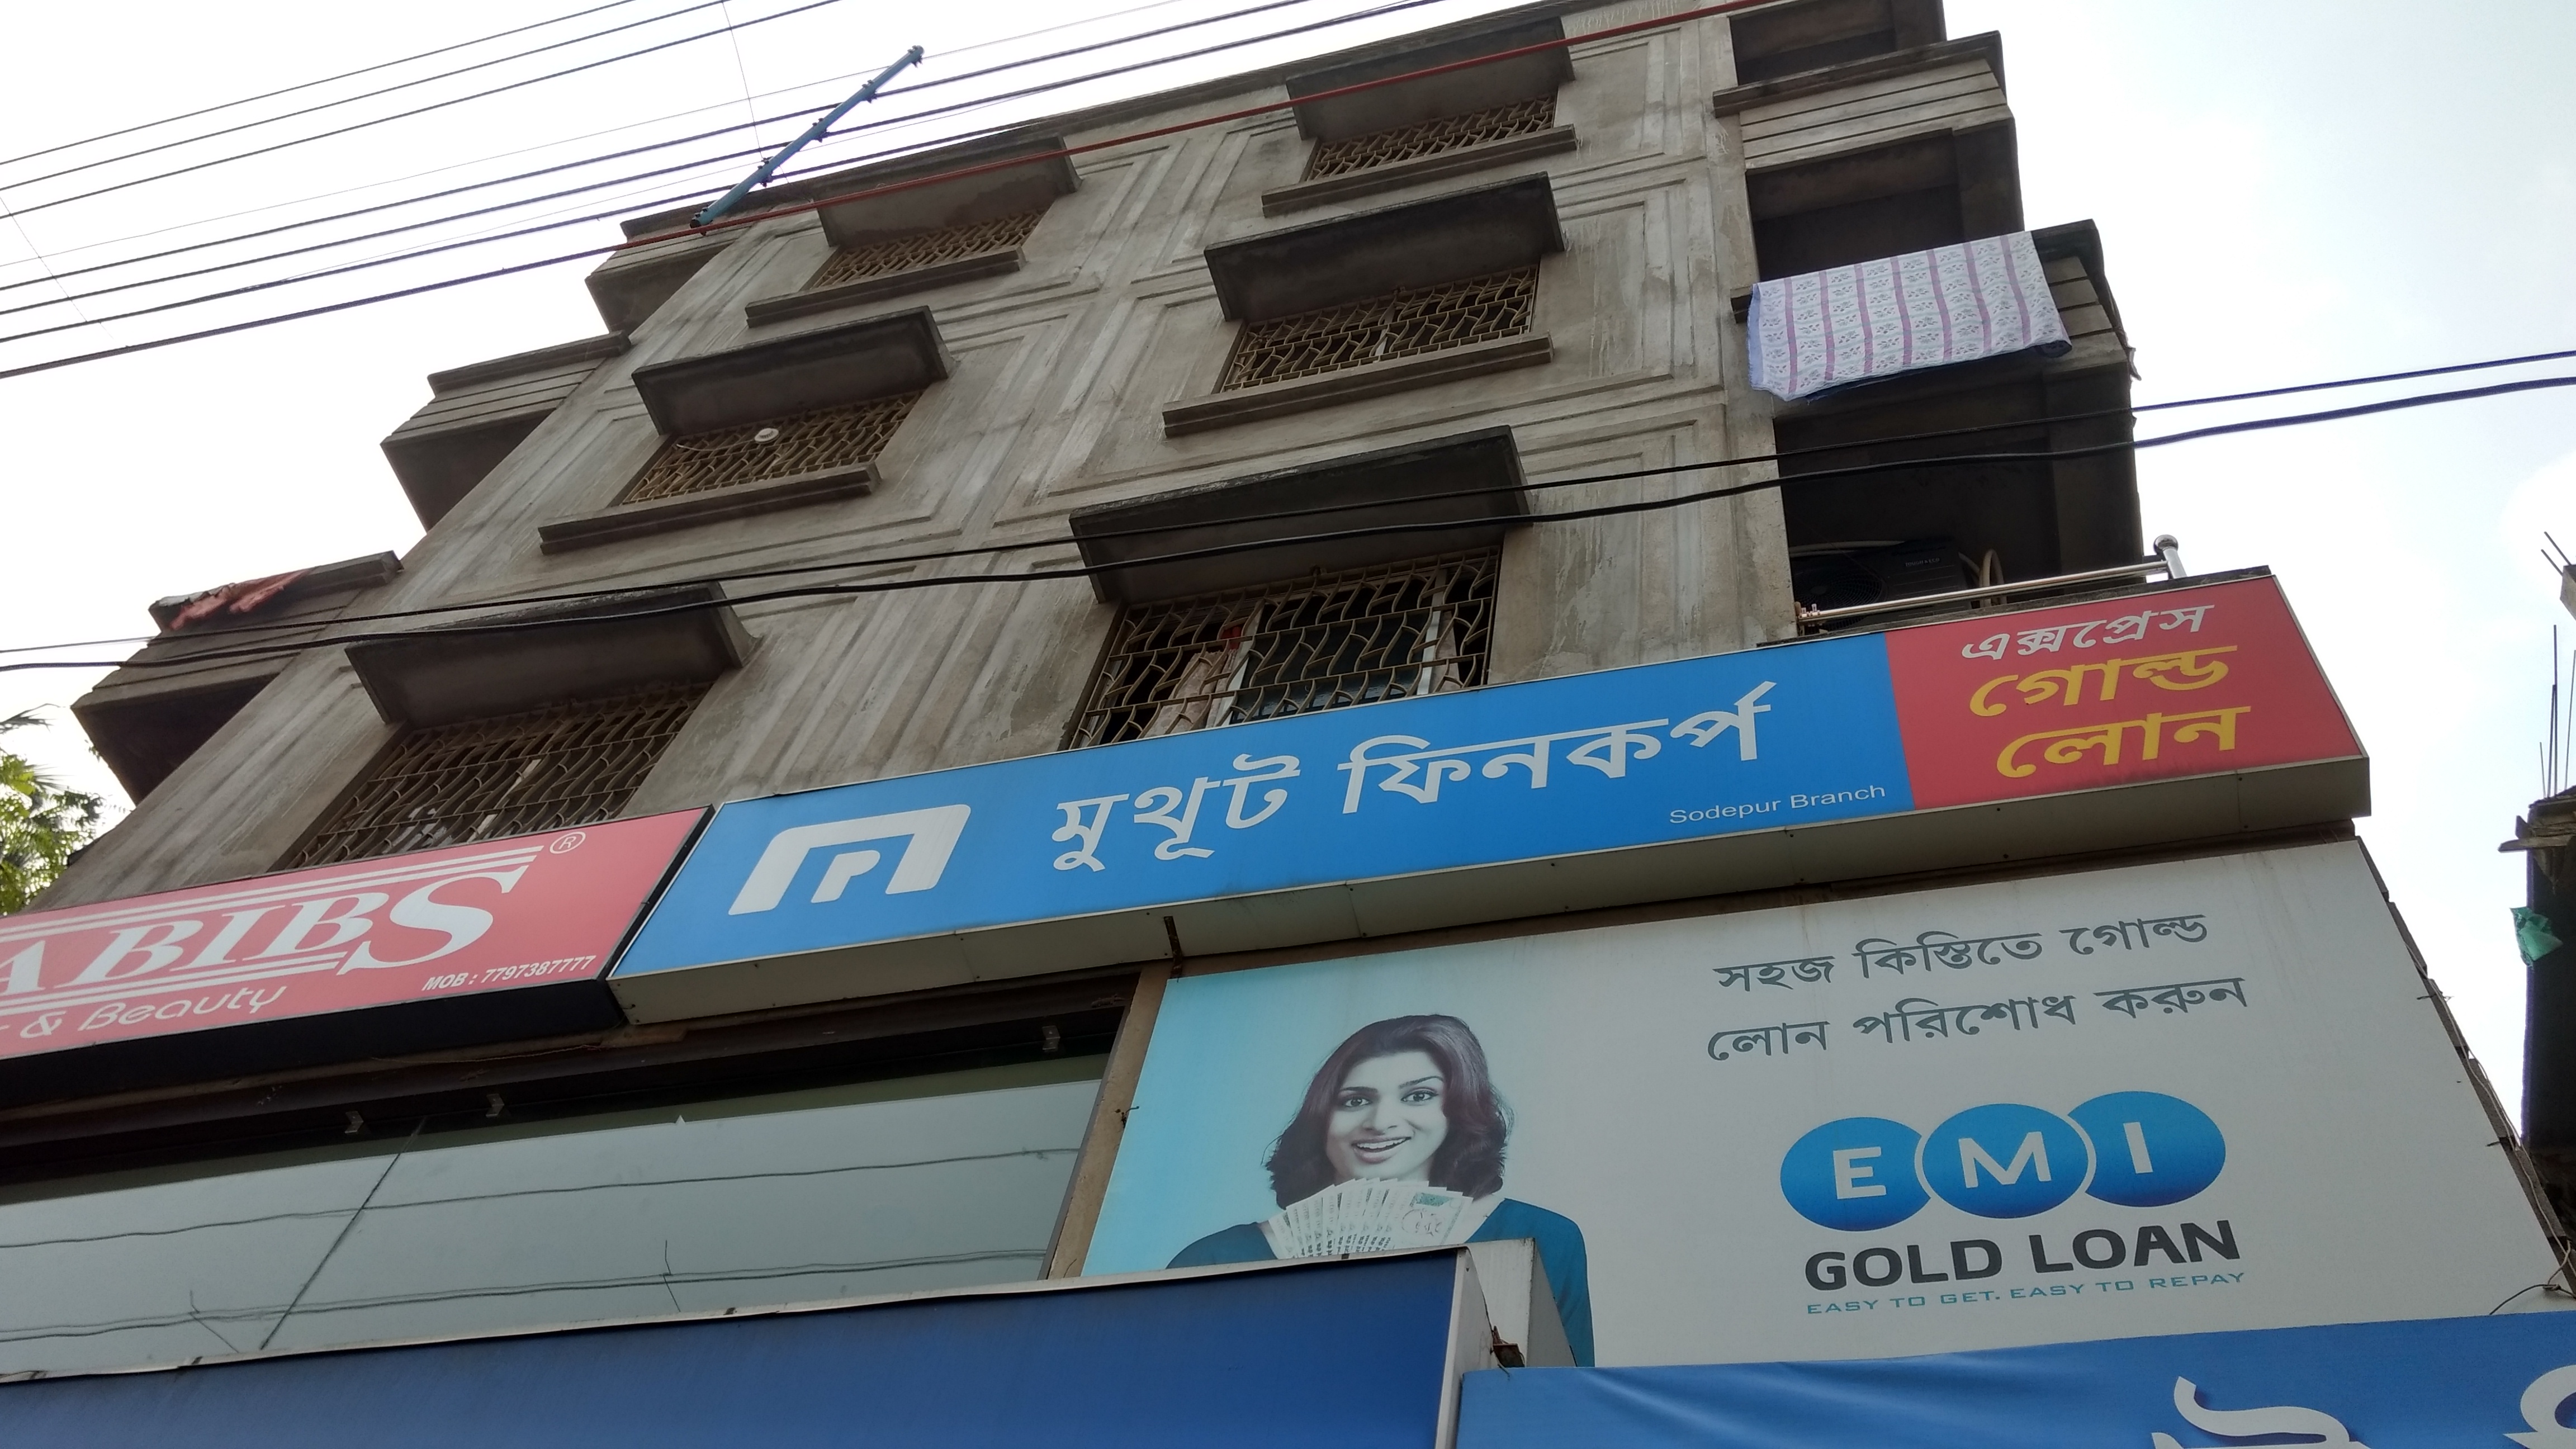 Muthoot Fincorp Gold Loan Services in Sodepur, Kolkata, West Bengal